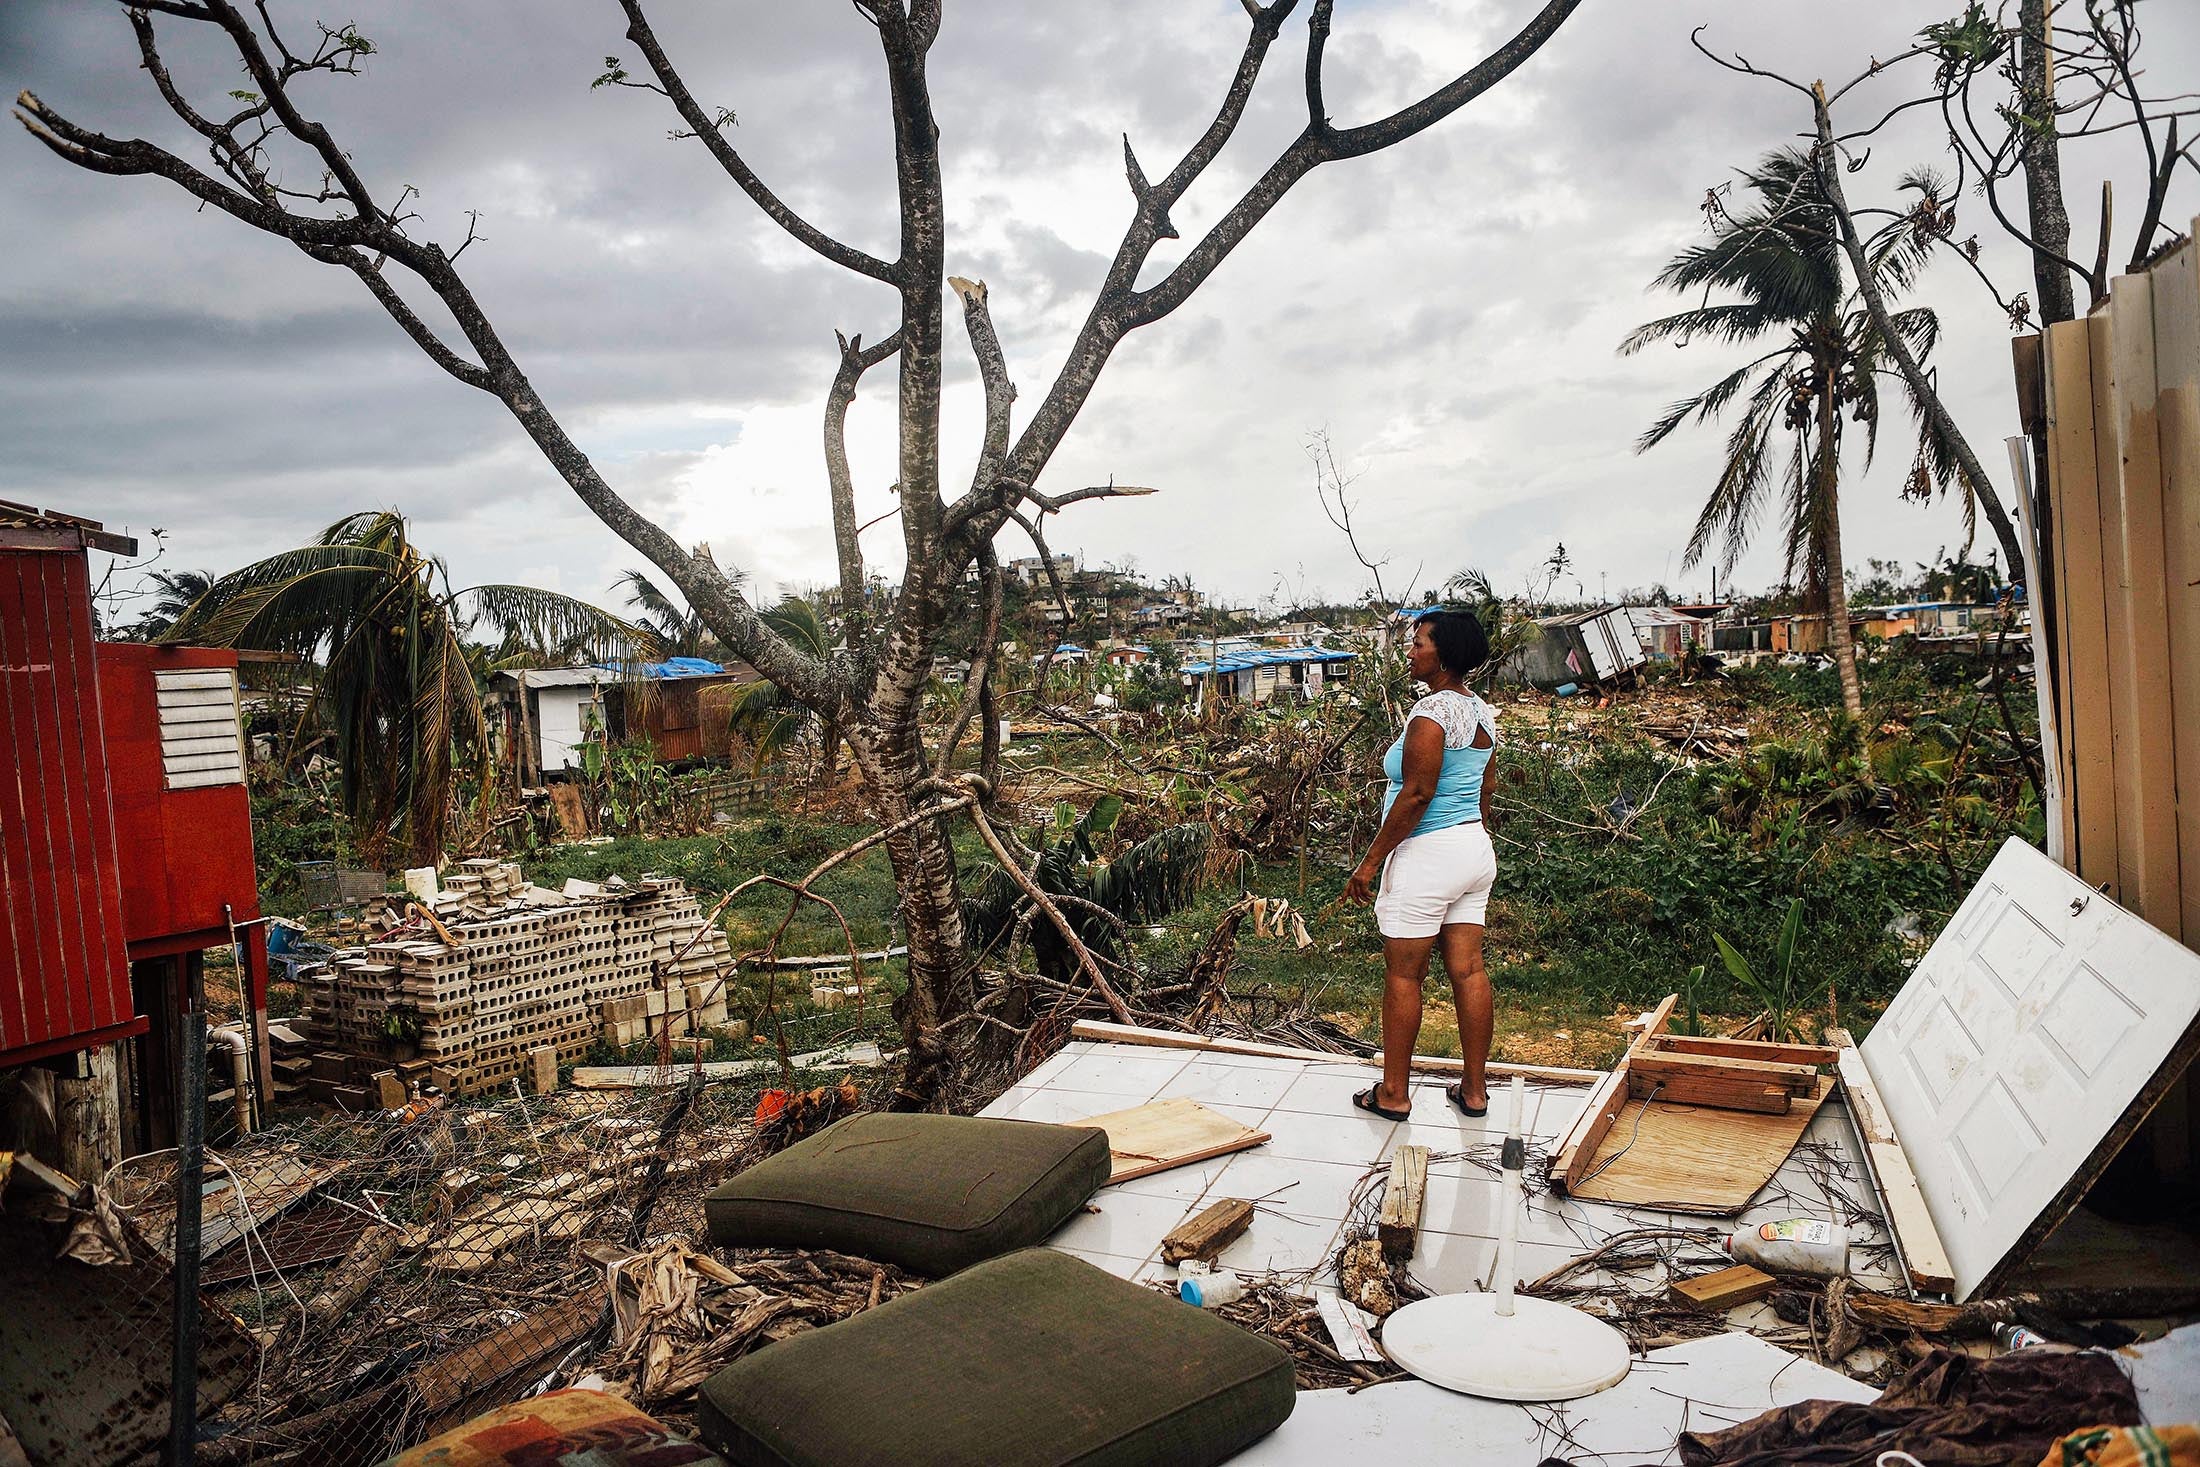 A woman standing on the floor of a demolished house surveying a landscape strewn with debris from other homes toppled by a hurricane.